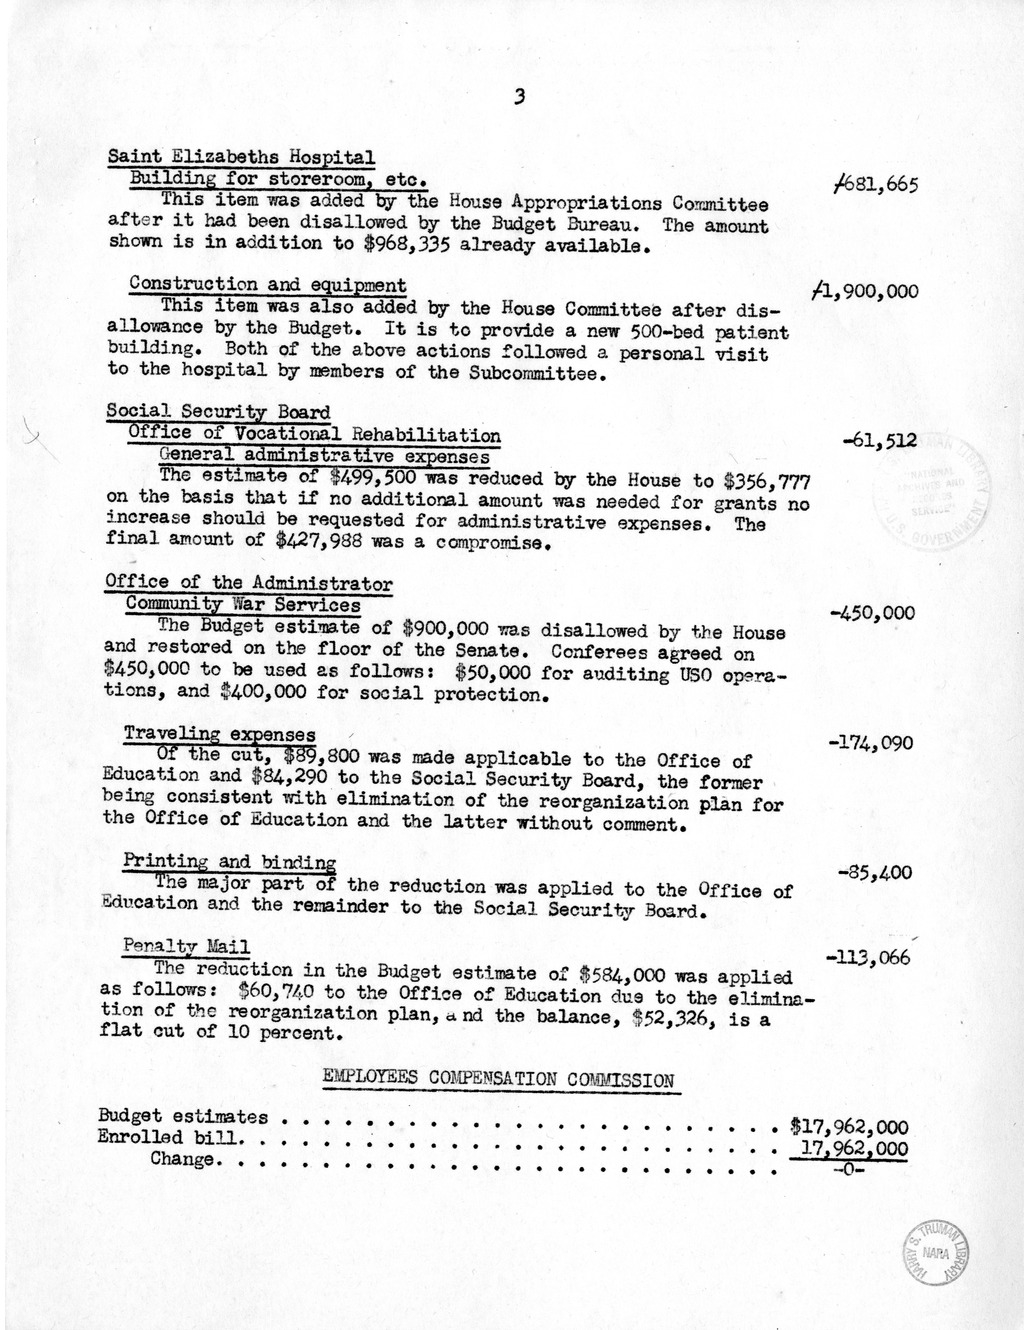 Memorandum from Harold D. Smith to M. C. Latta, H.R. 3199, Making Appropriations for the Department of Labor, the Federal Security Agency, and Related Independent Agencies, for the Fiscal Year Ending June 30, 1946, with Attachments